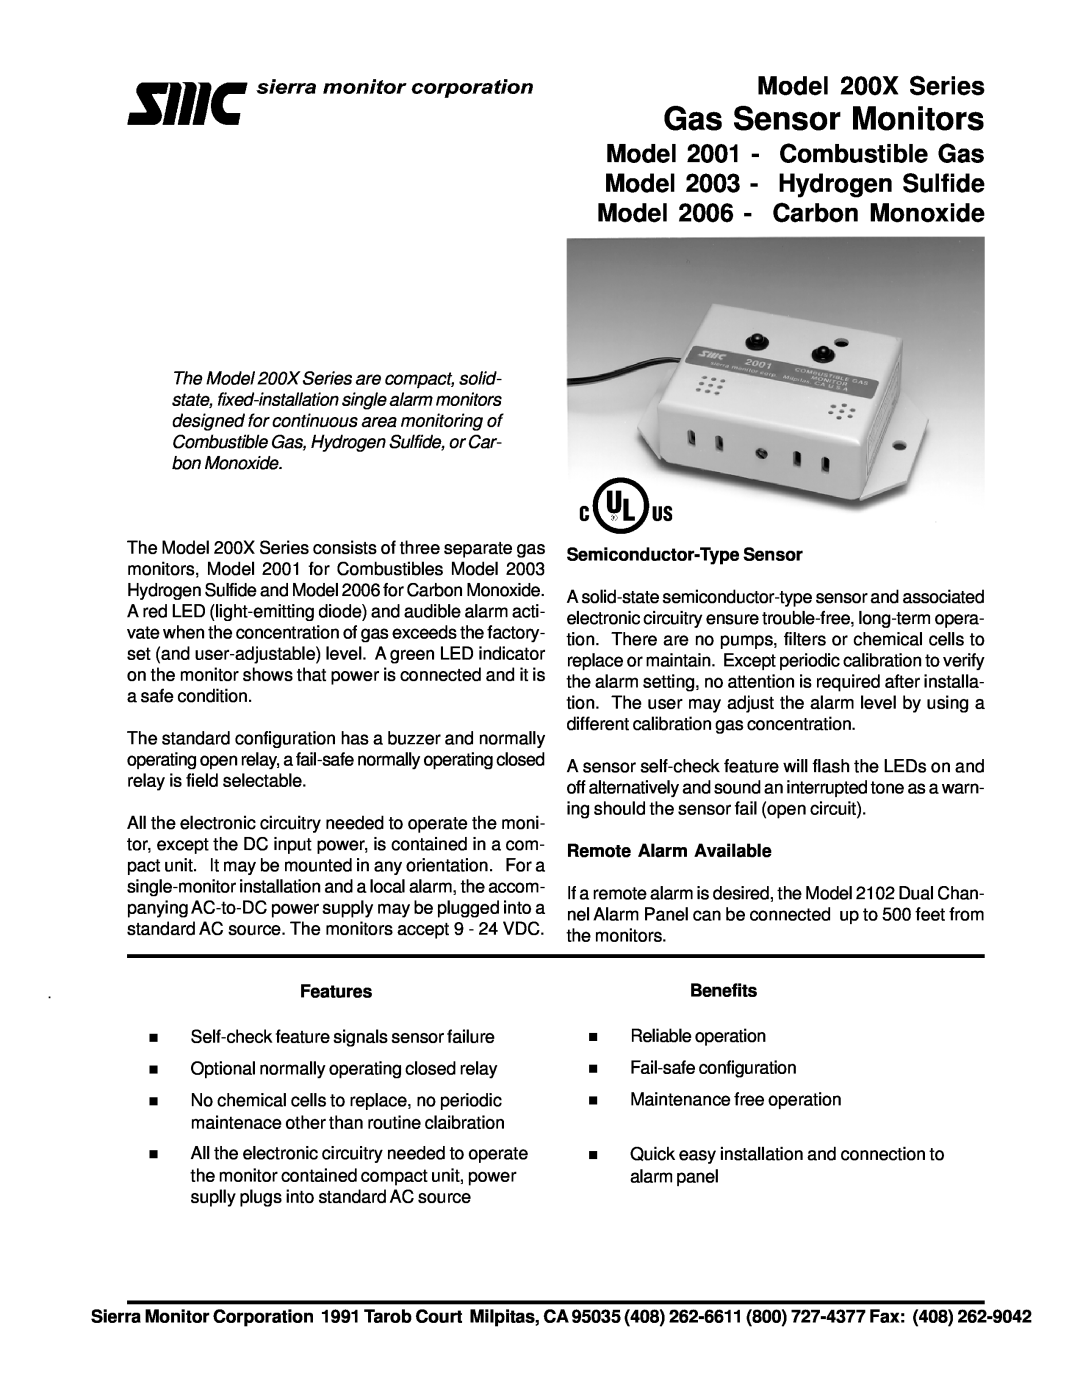 Sierra Monitor Corporation 2001, 2003, 2006 manual Semiconductor-TypeSensor, Remote Alarm Available, Features, Benefits 